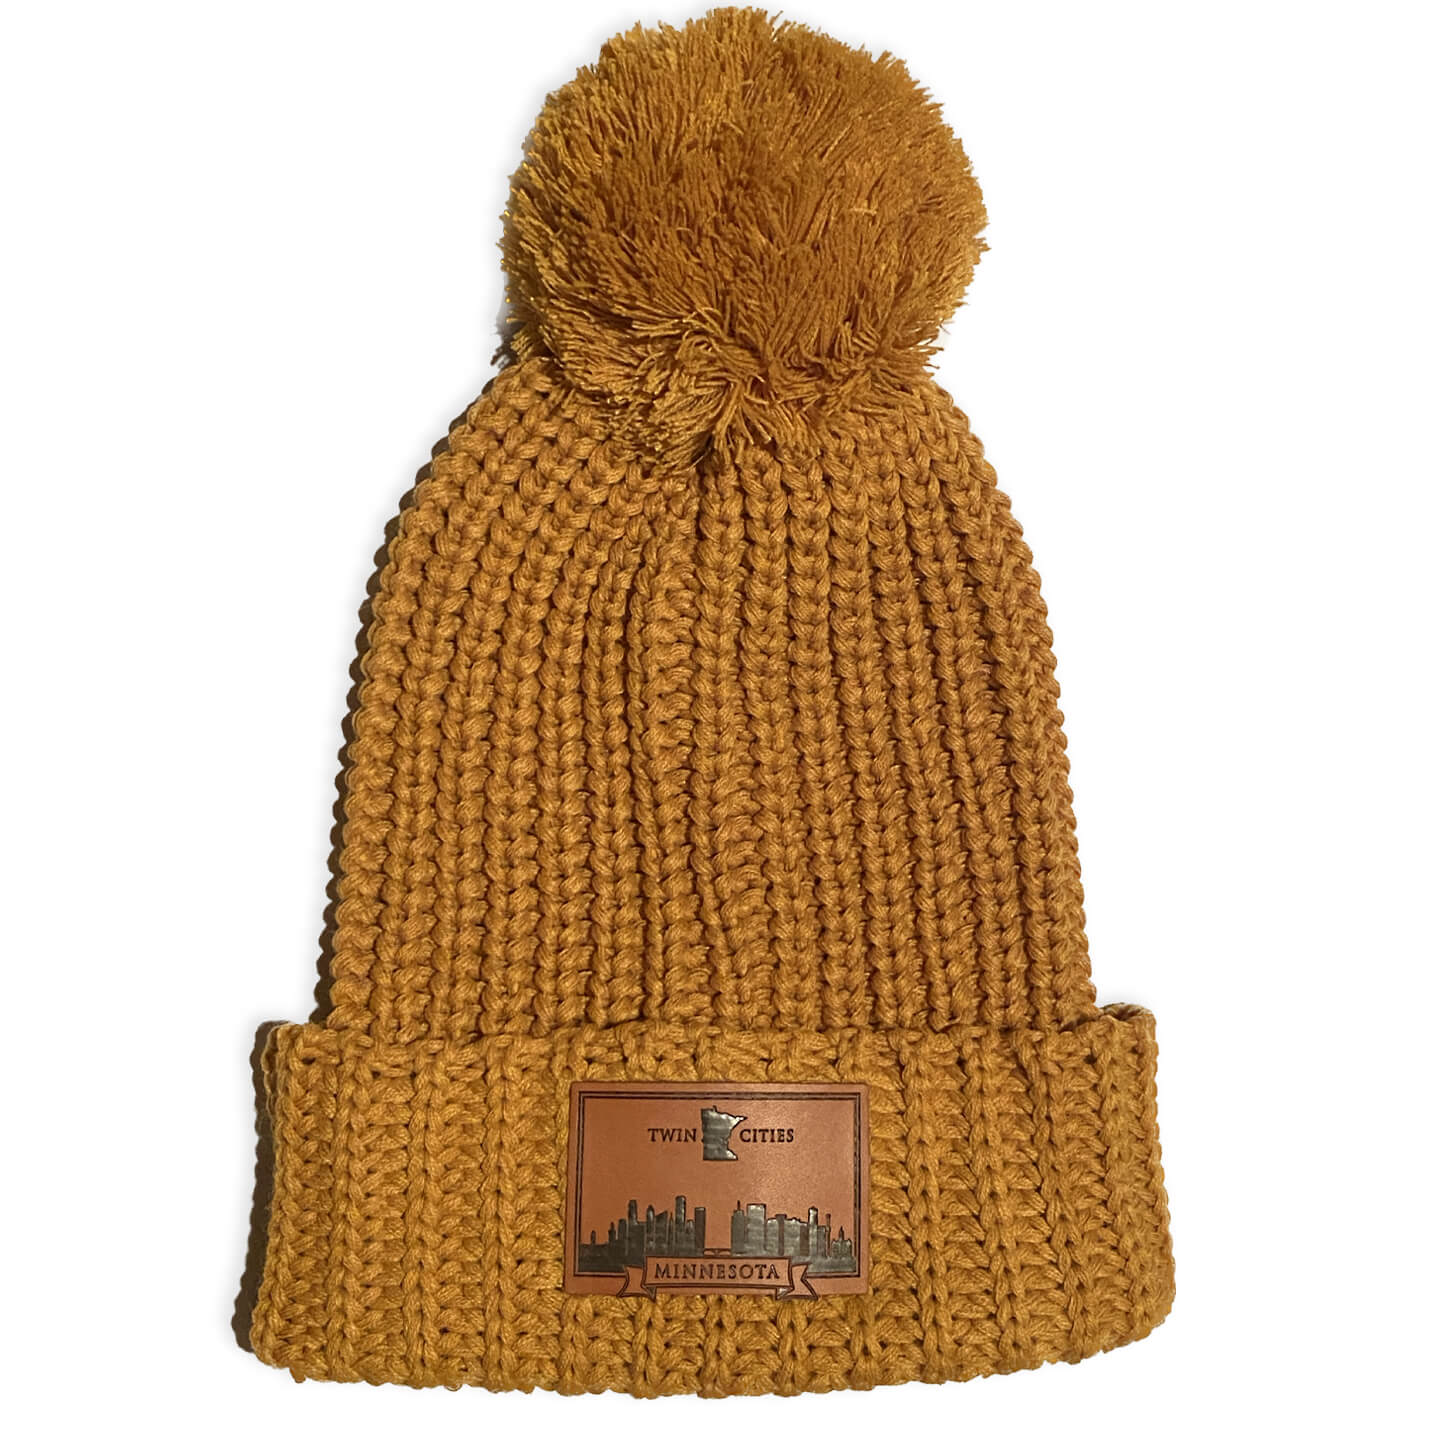 Caramel Chunky Cable with Cuff & Pom Beanie with Leather Twin Cities Leather Patch